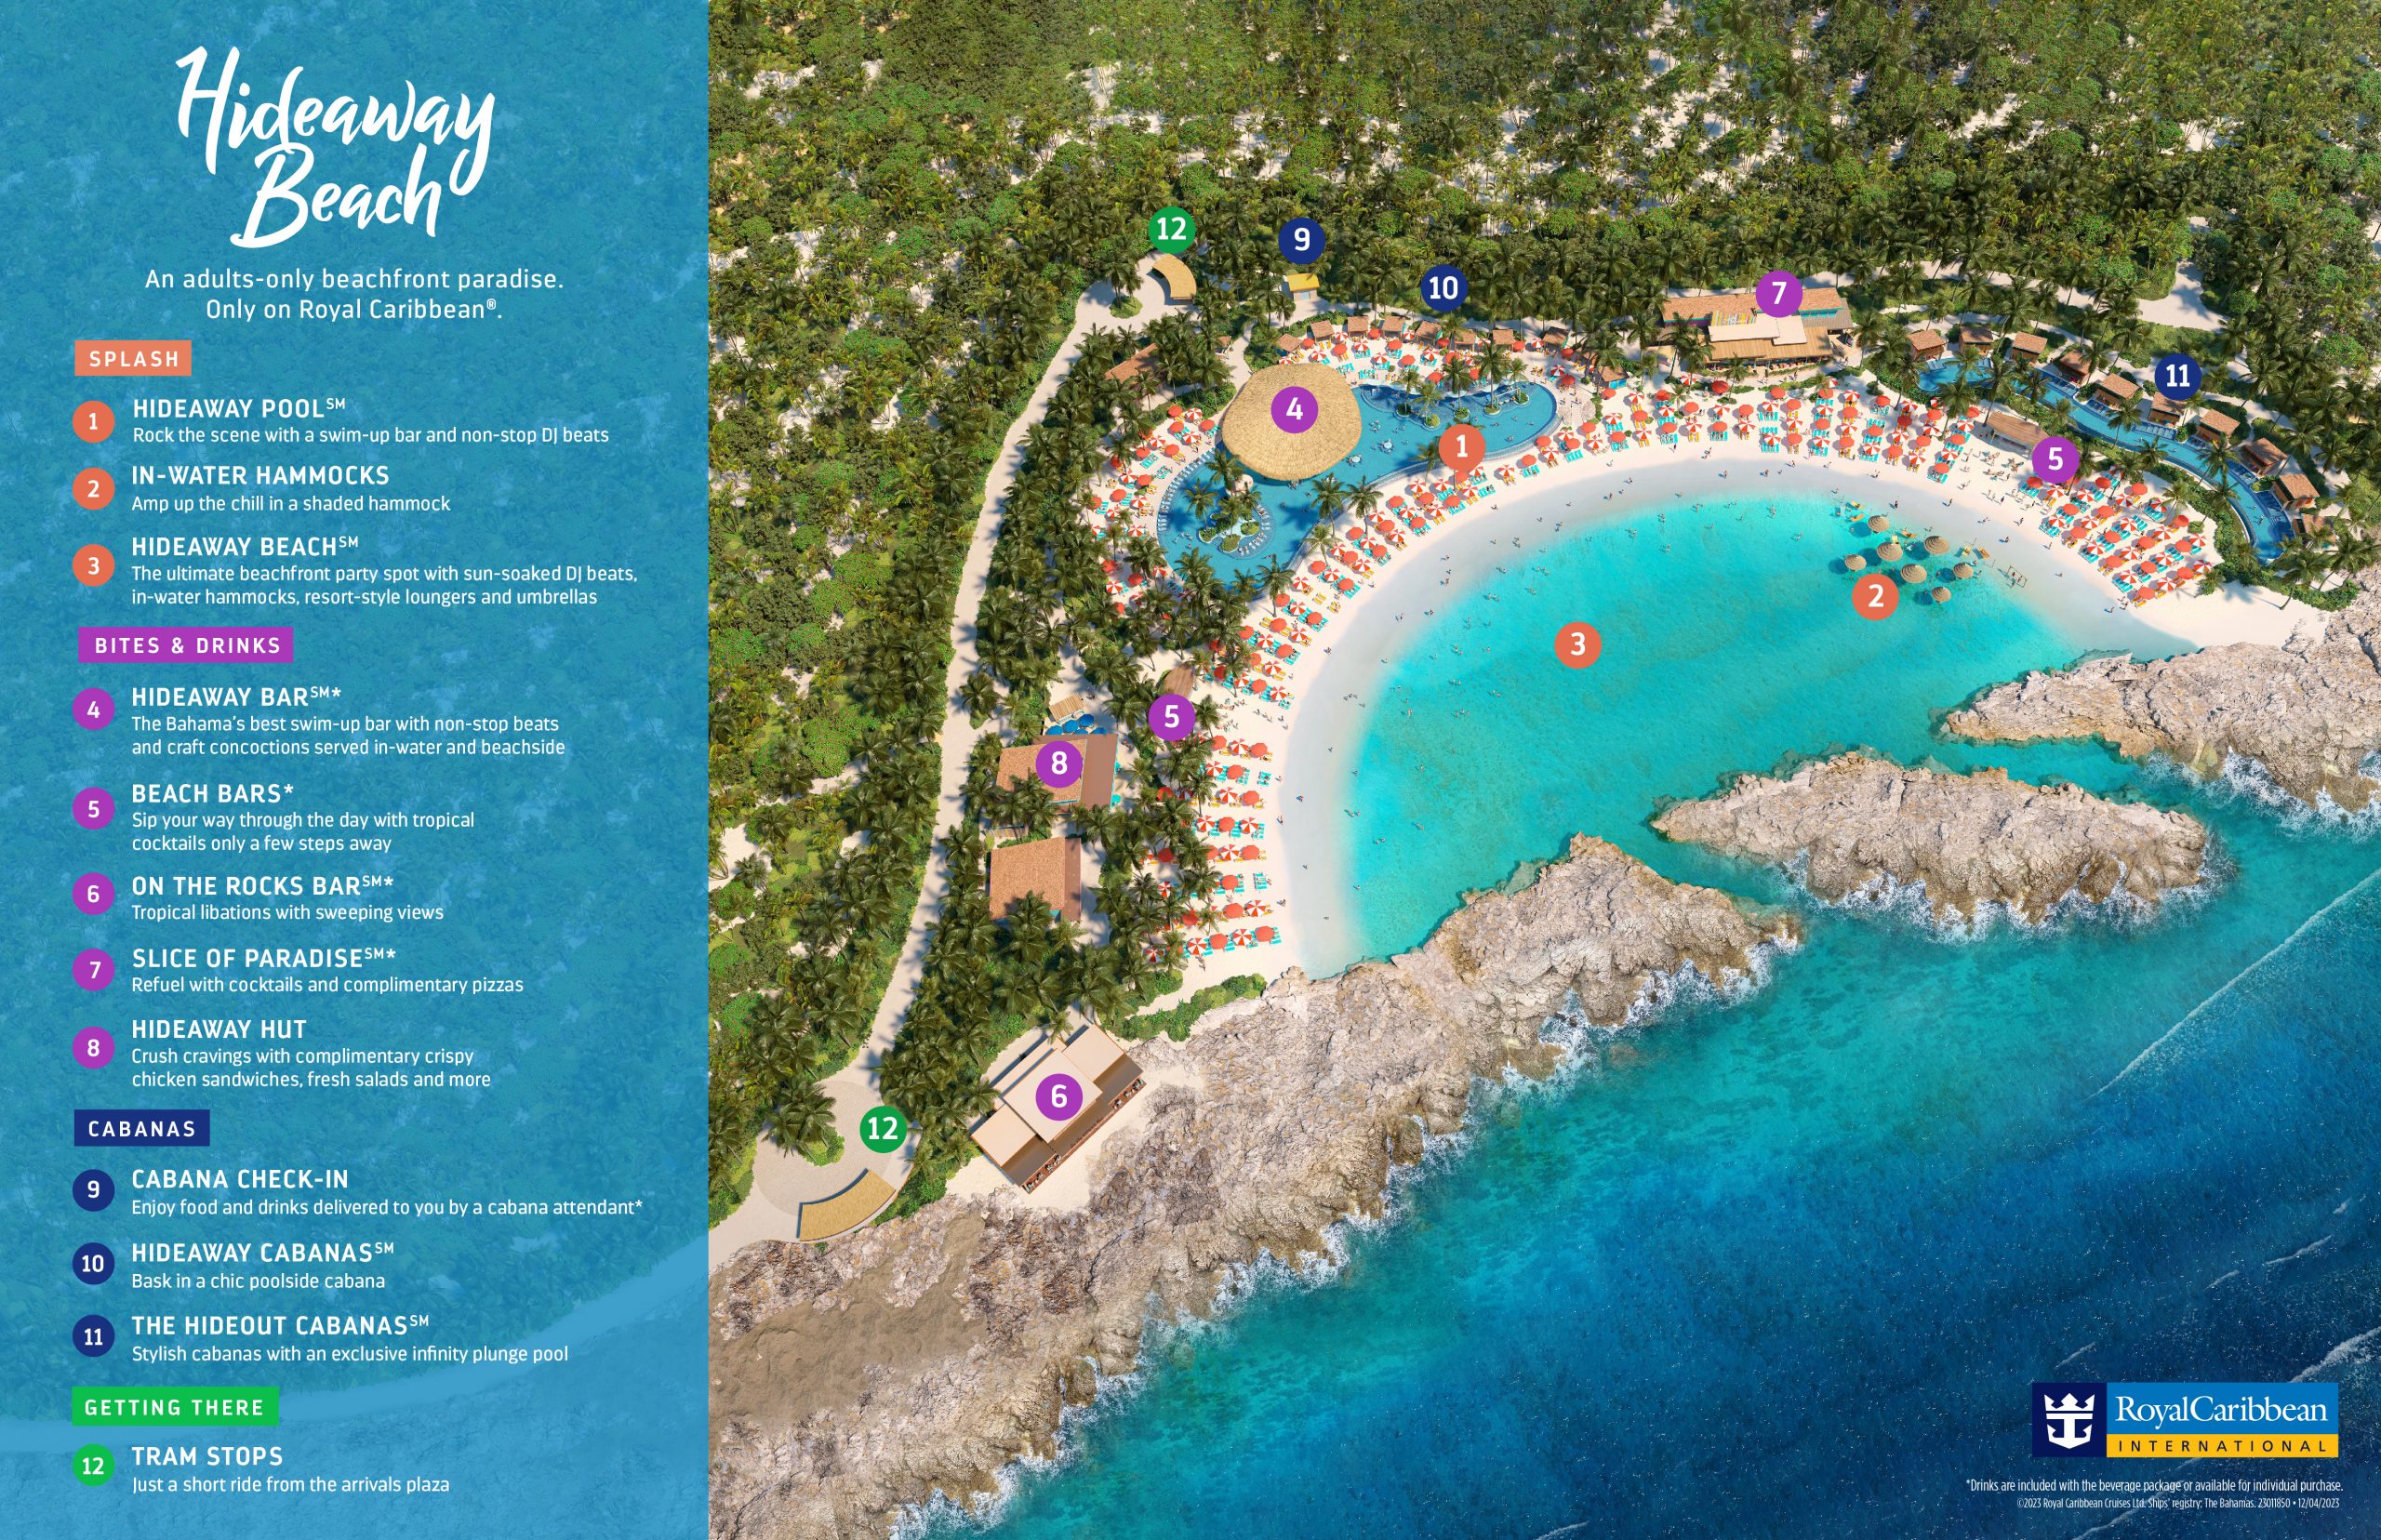 https://www.royalcaribbeanincentives.com/content/uploads/23011850_Hideaway_Beach_Map-scaled.jpg